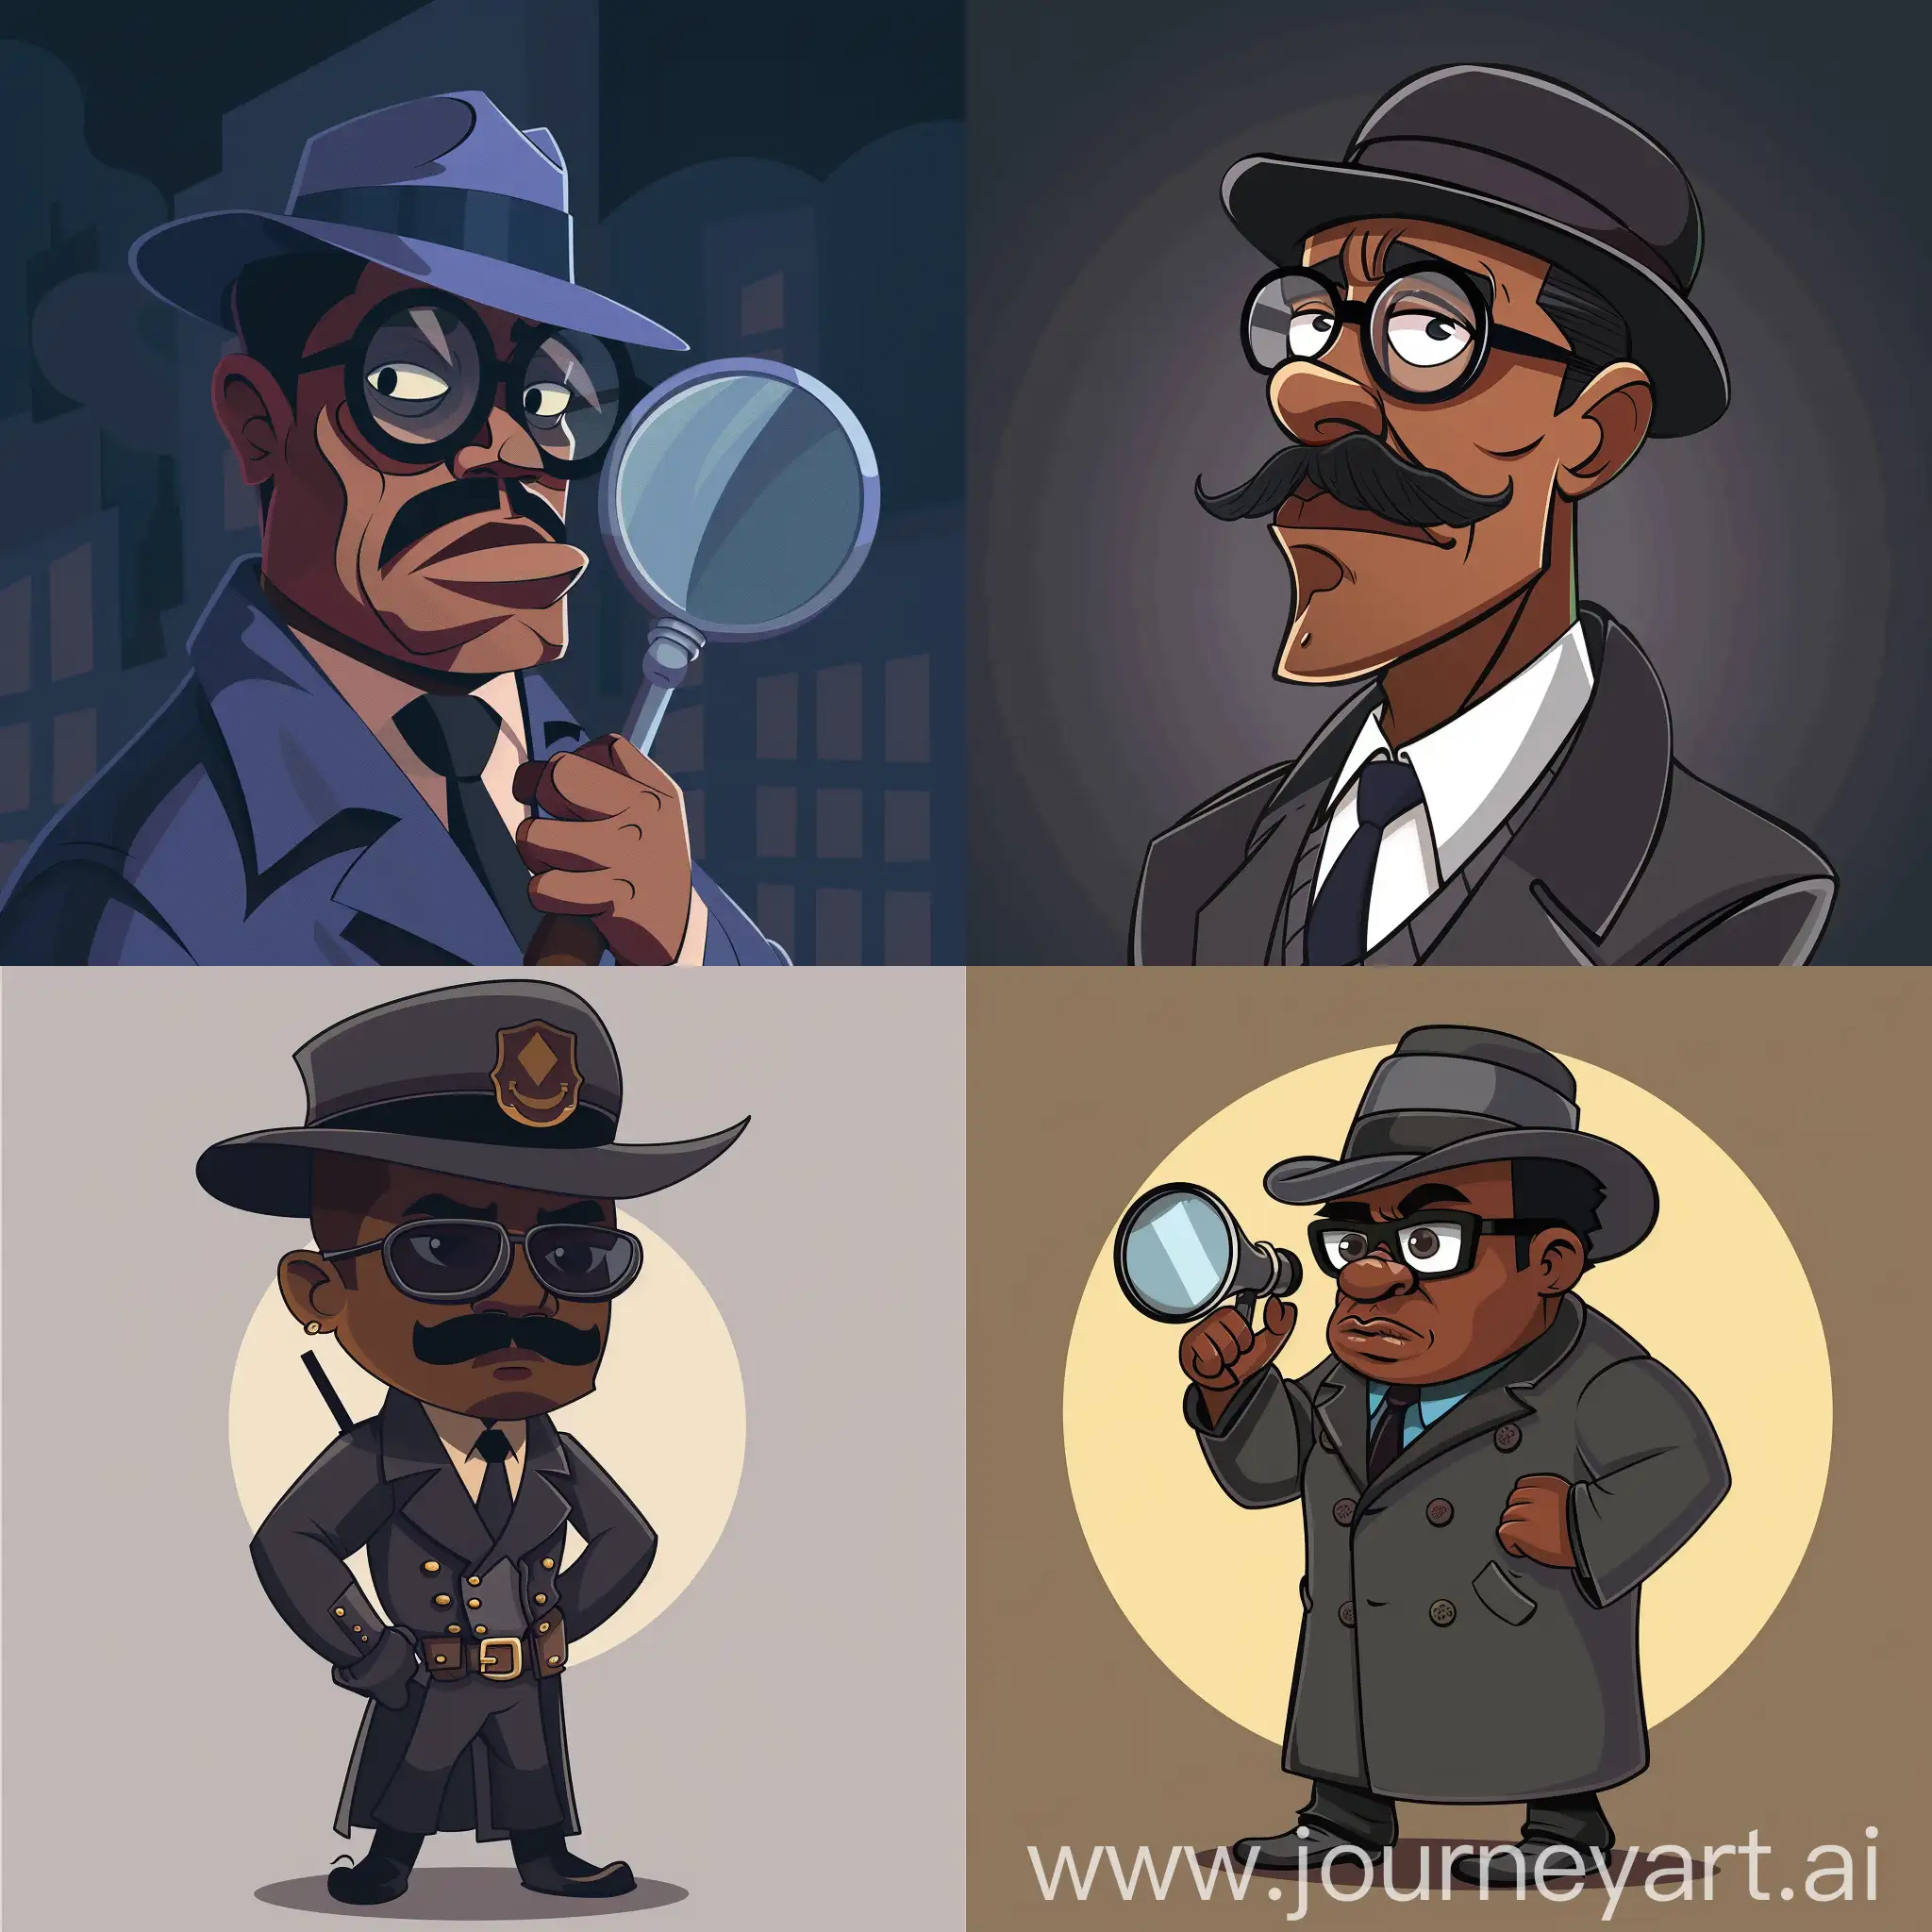 Cartoon-Black-Detective-Solving-a-Mystery-in-Noir-Style